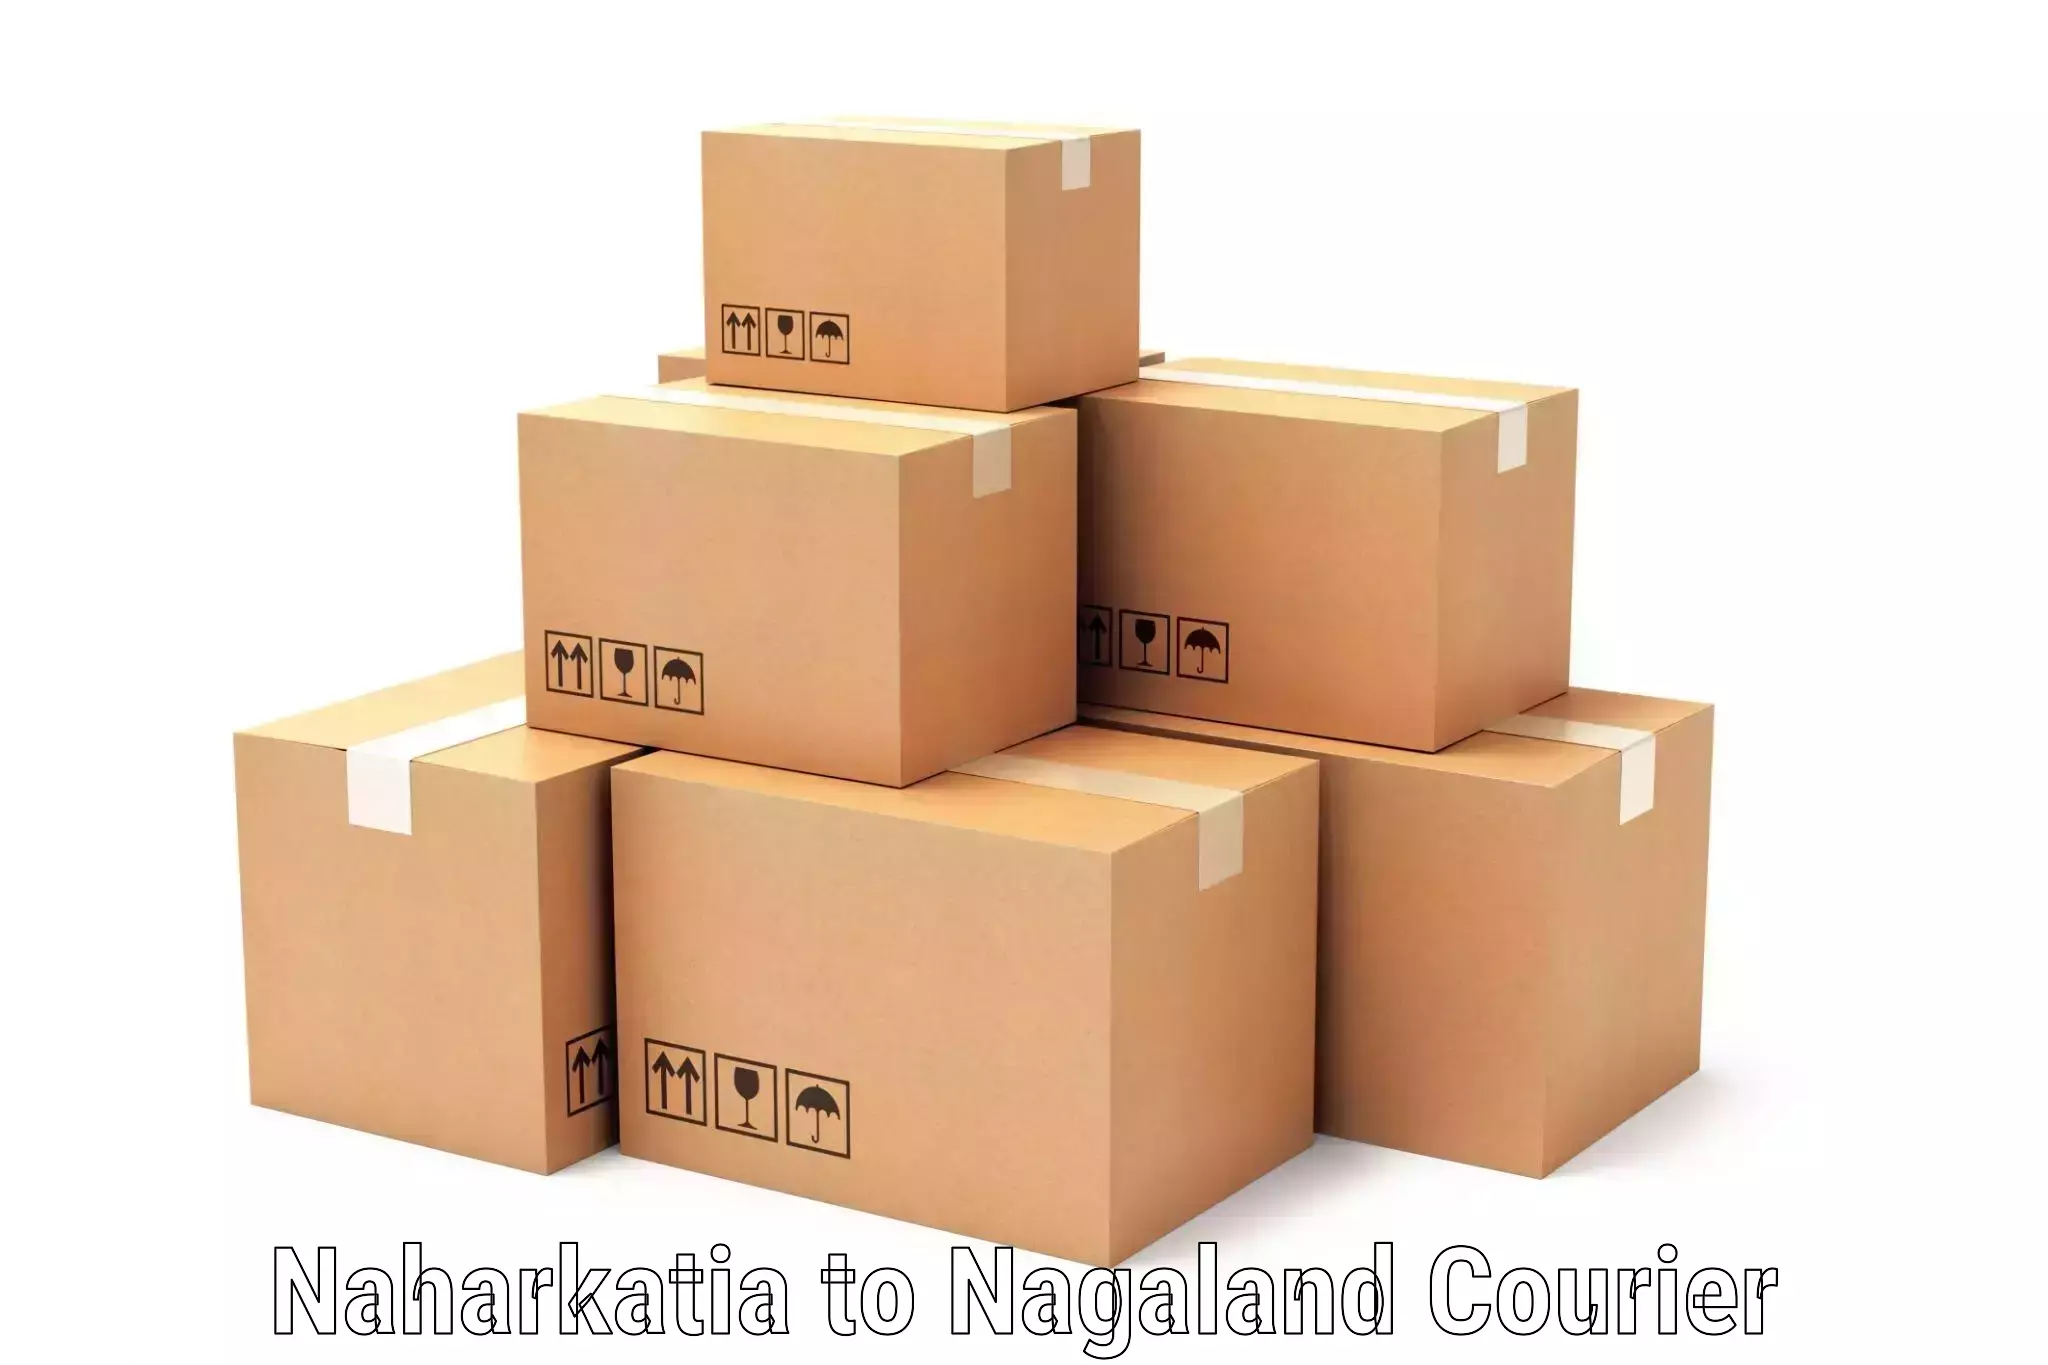 Fast shipping solutions in Naharkatia to Mon